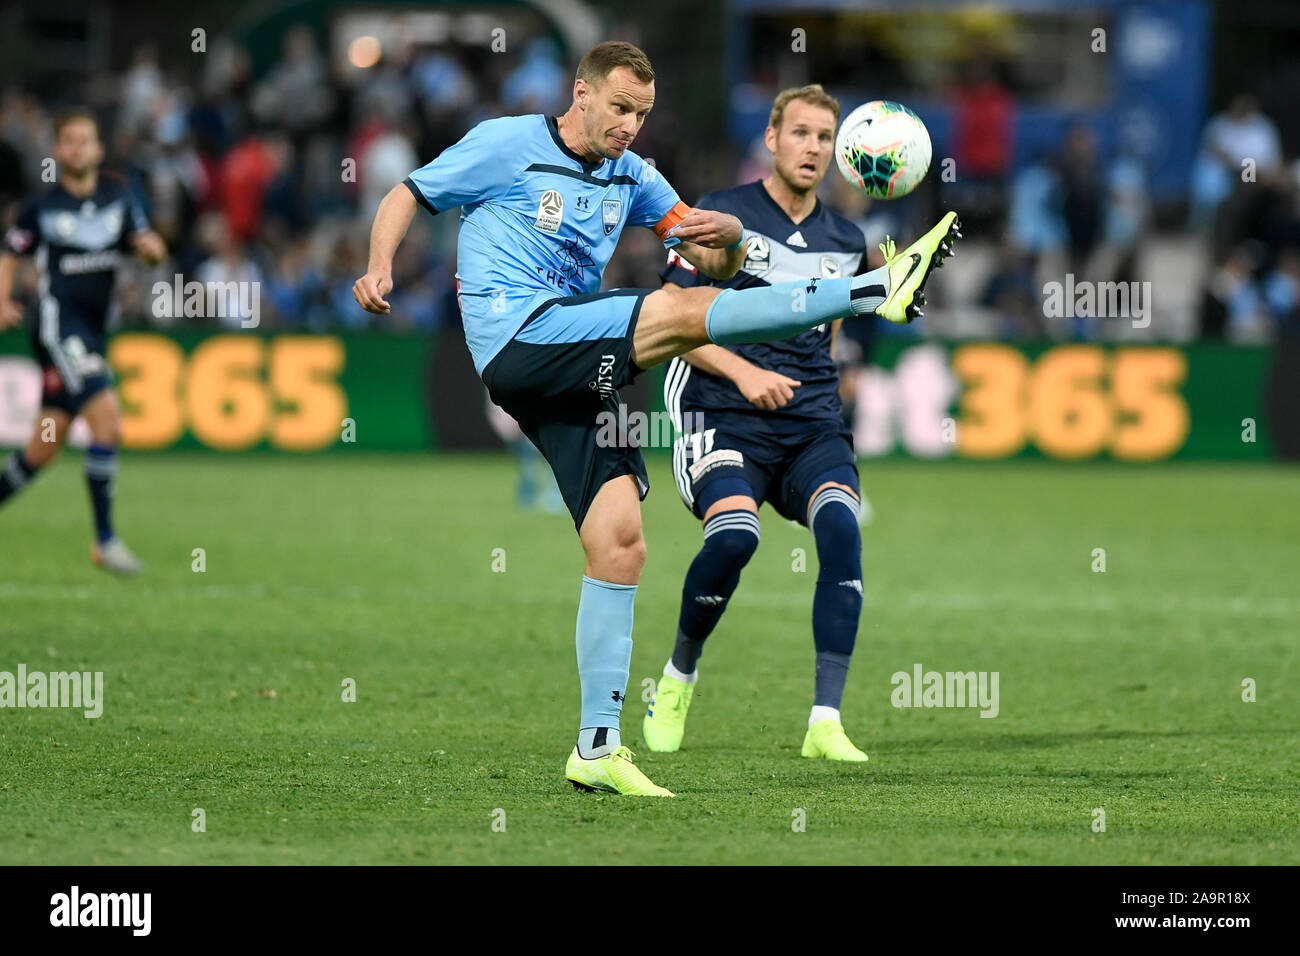 Sydney, Australia. 17th Nov 2019. A League Football, Sydney Football Club versus Melbourne Victory; Alex Wilkinson of Sydney clears the ball from danger Credit: Action Plus Sports Images/Alamy Live News Stock Photo